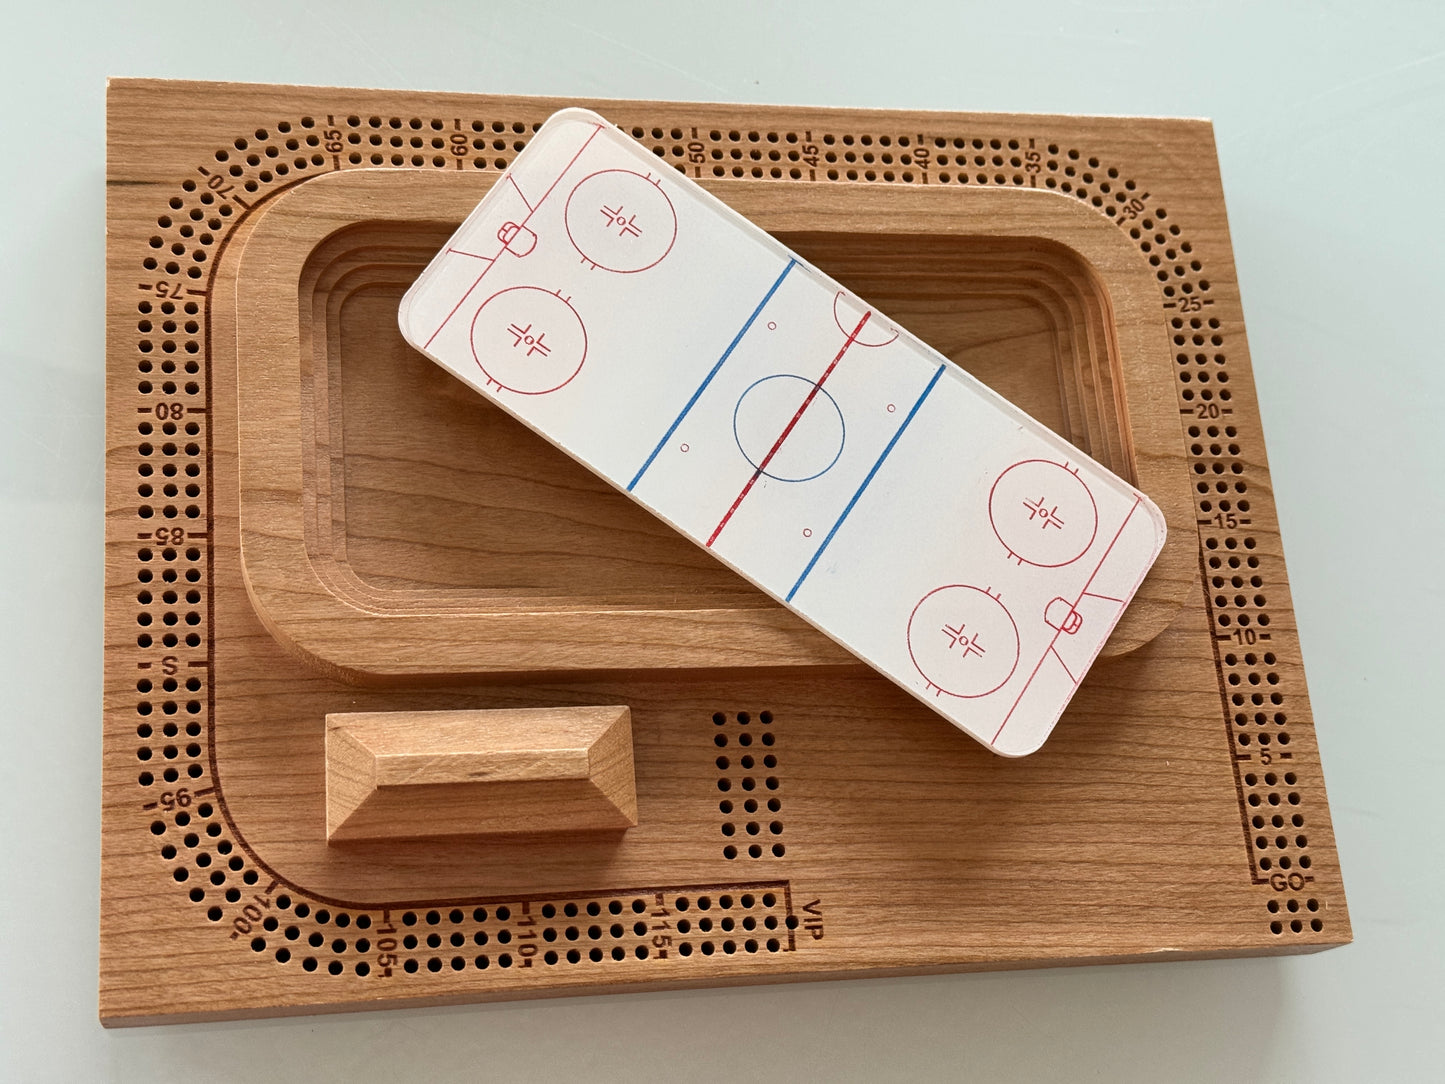 Add Hockey, Football or Curling Surface to our Arena Board